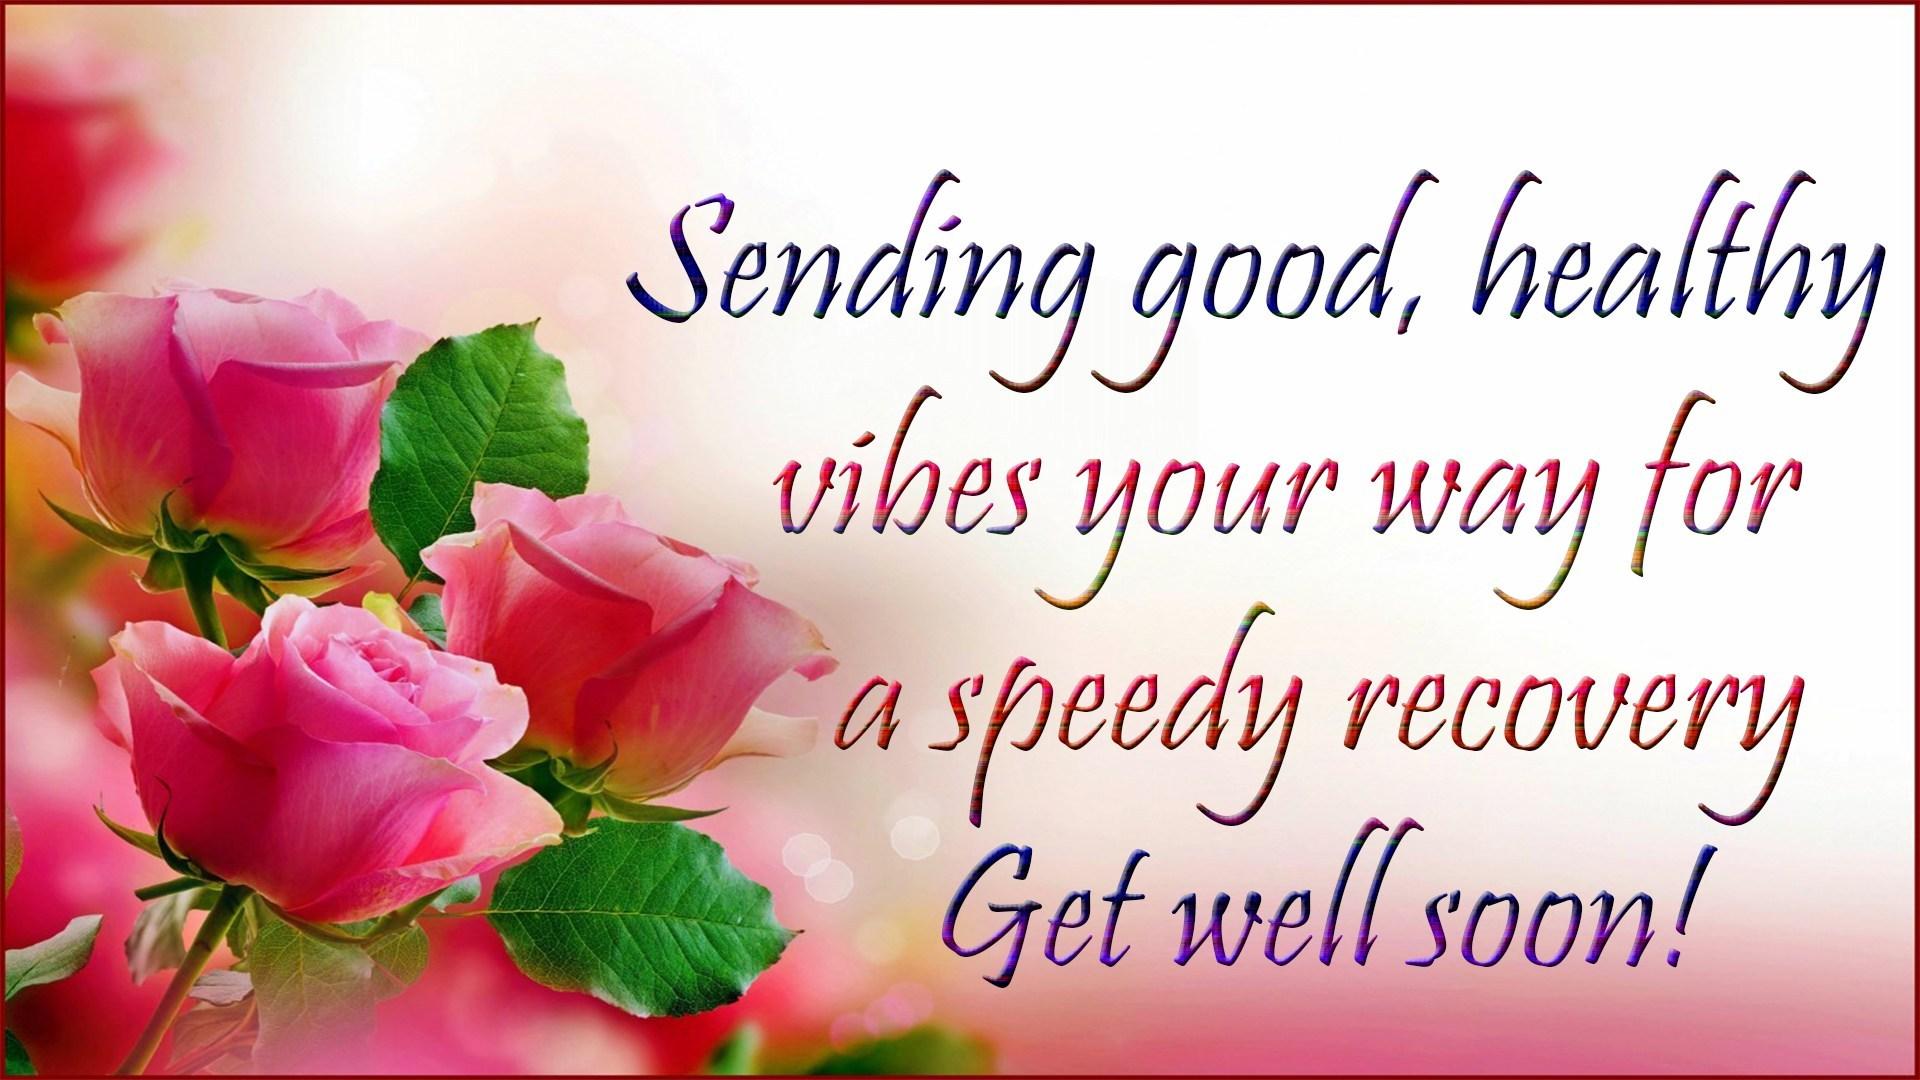 Get Well Soon Wallpapers Image